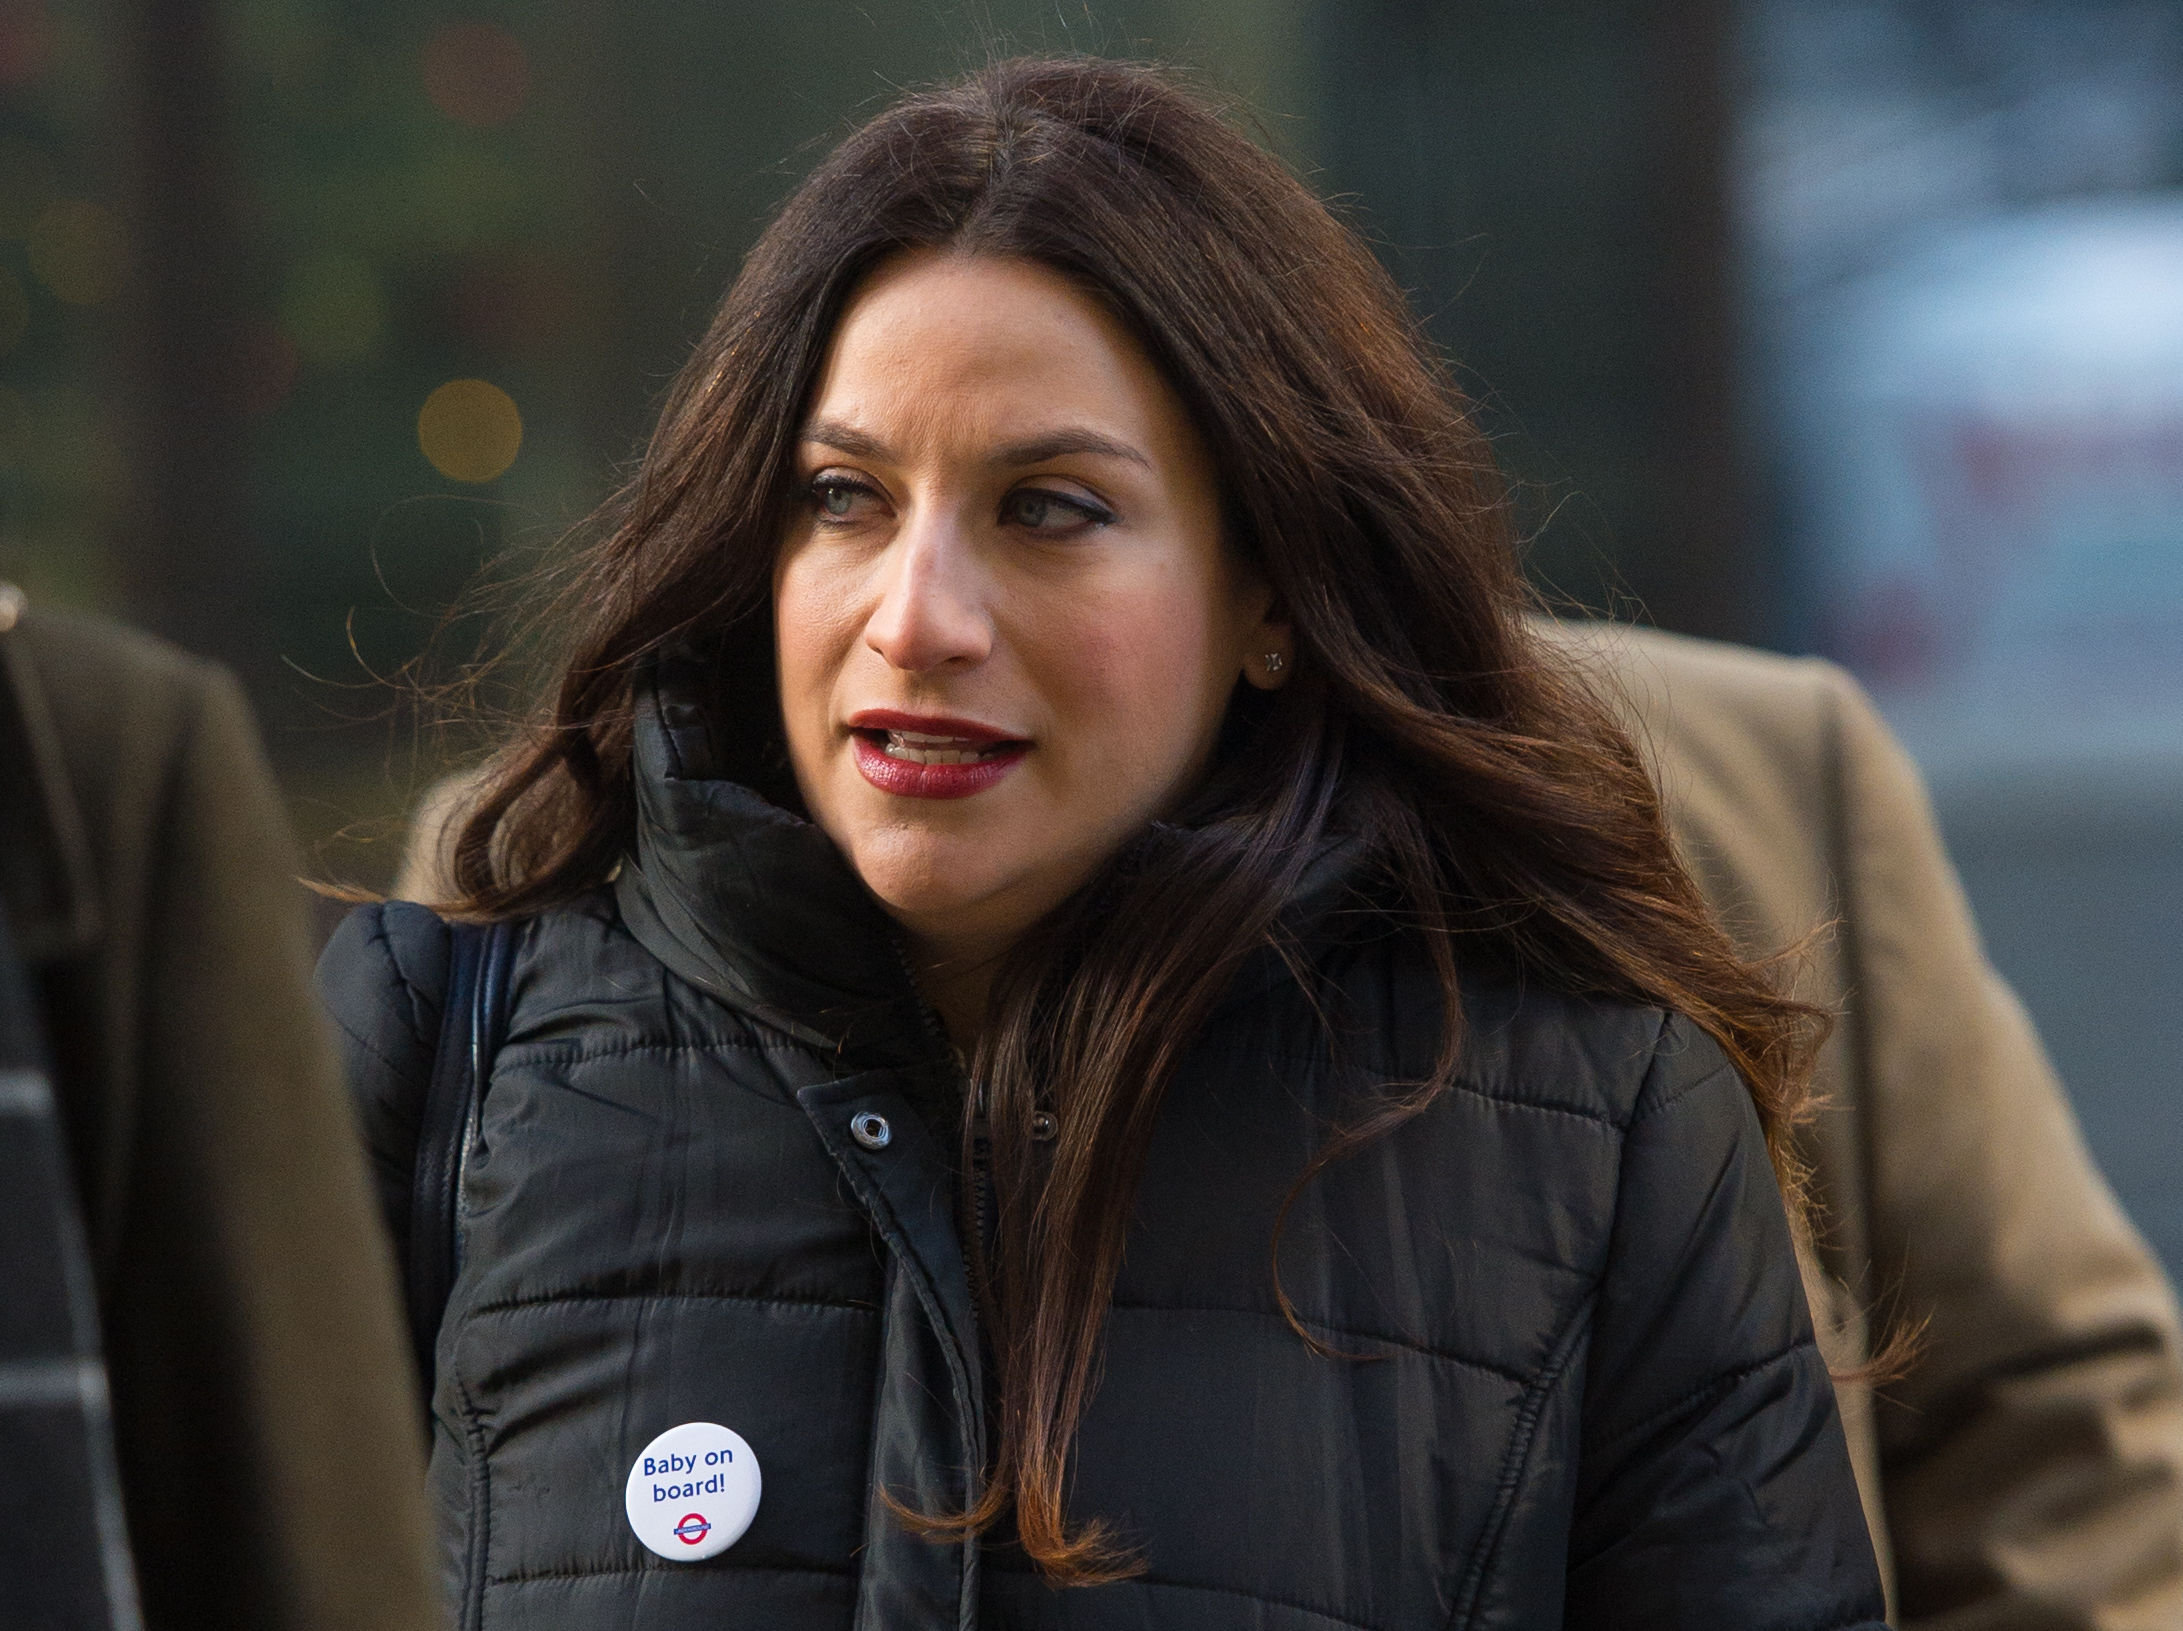 Labour MP Luciana Berger was&nbsp;harassed online by a man who was later convicted